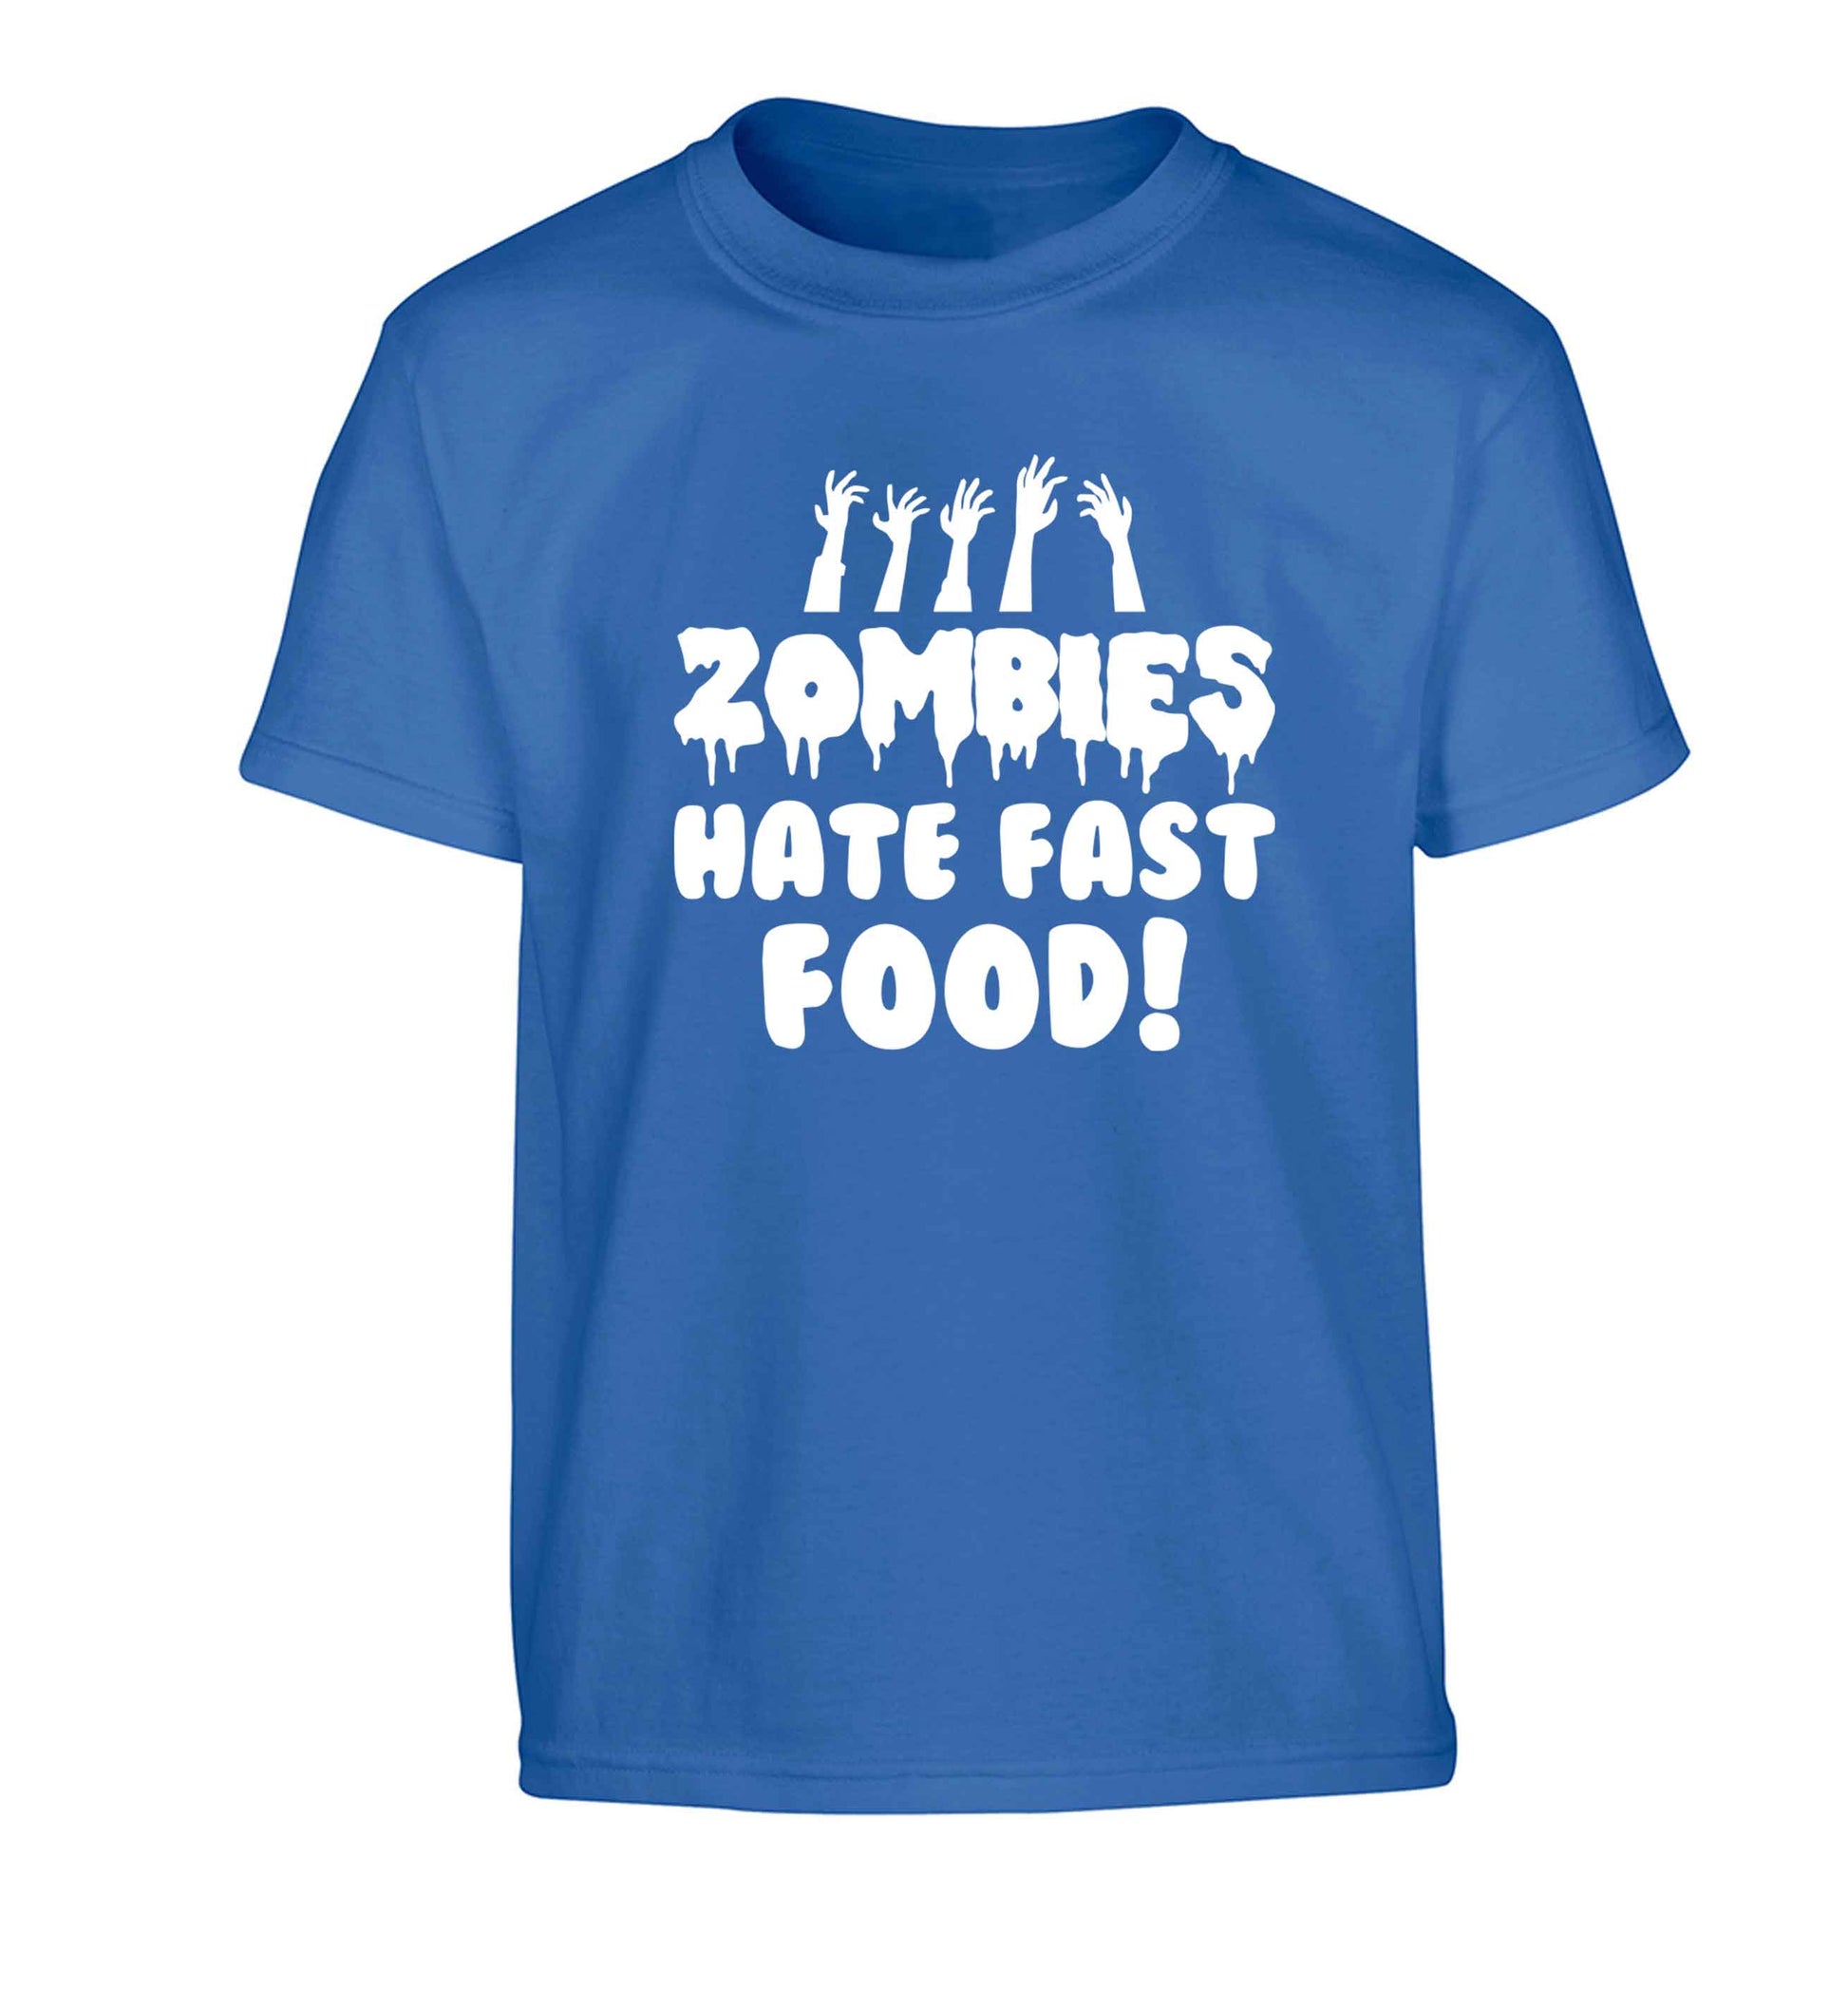 Zombies hate fast food Children's blue Tshirt 12-13 Years